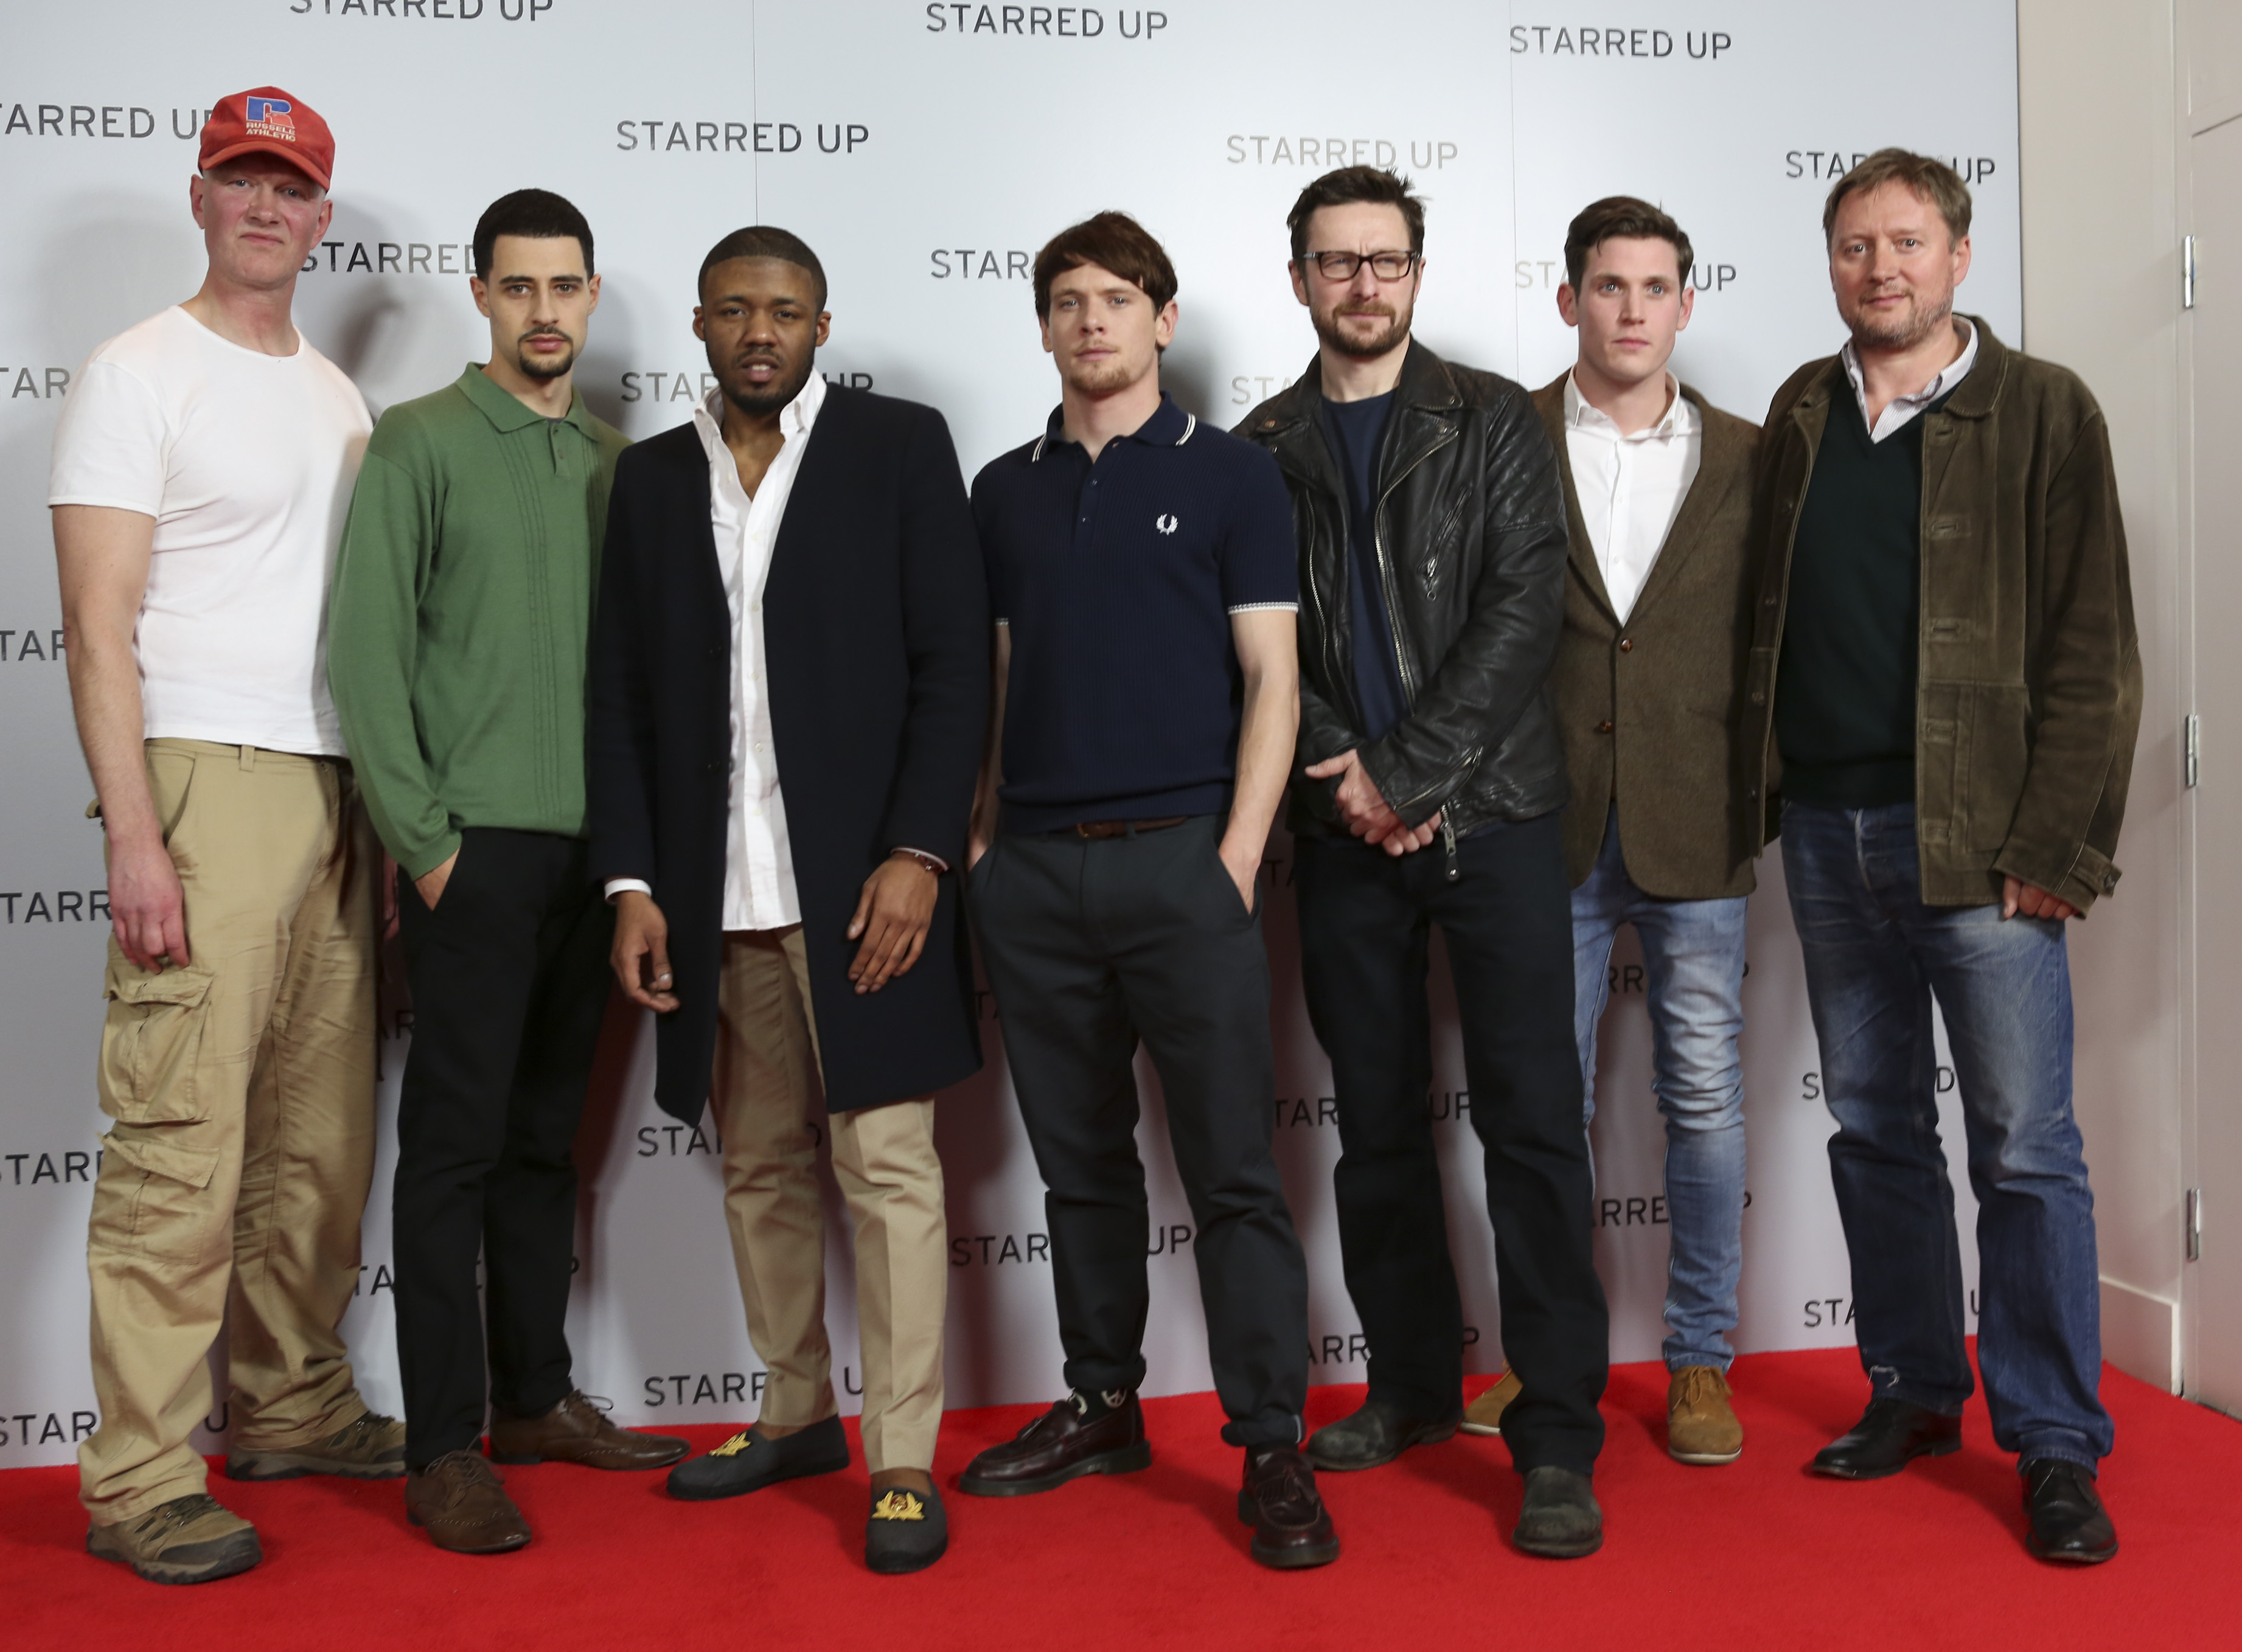 Starred Up premiere - Hackney Picturehouse, London, 2014